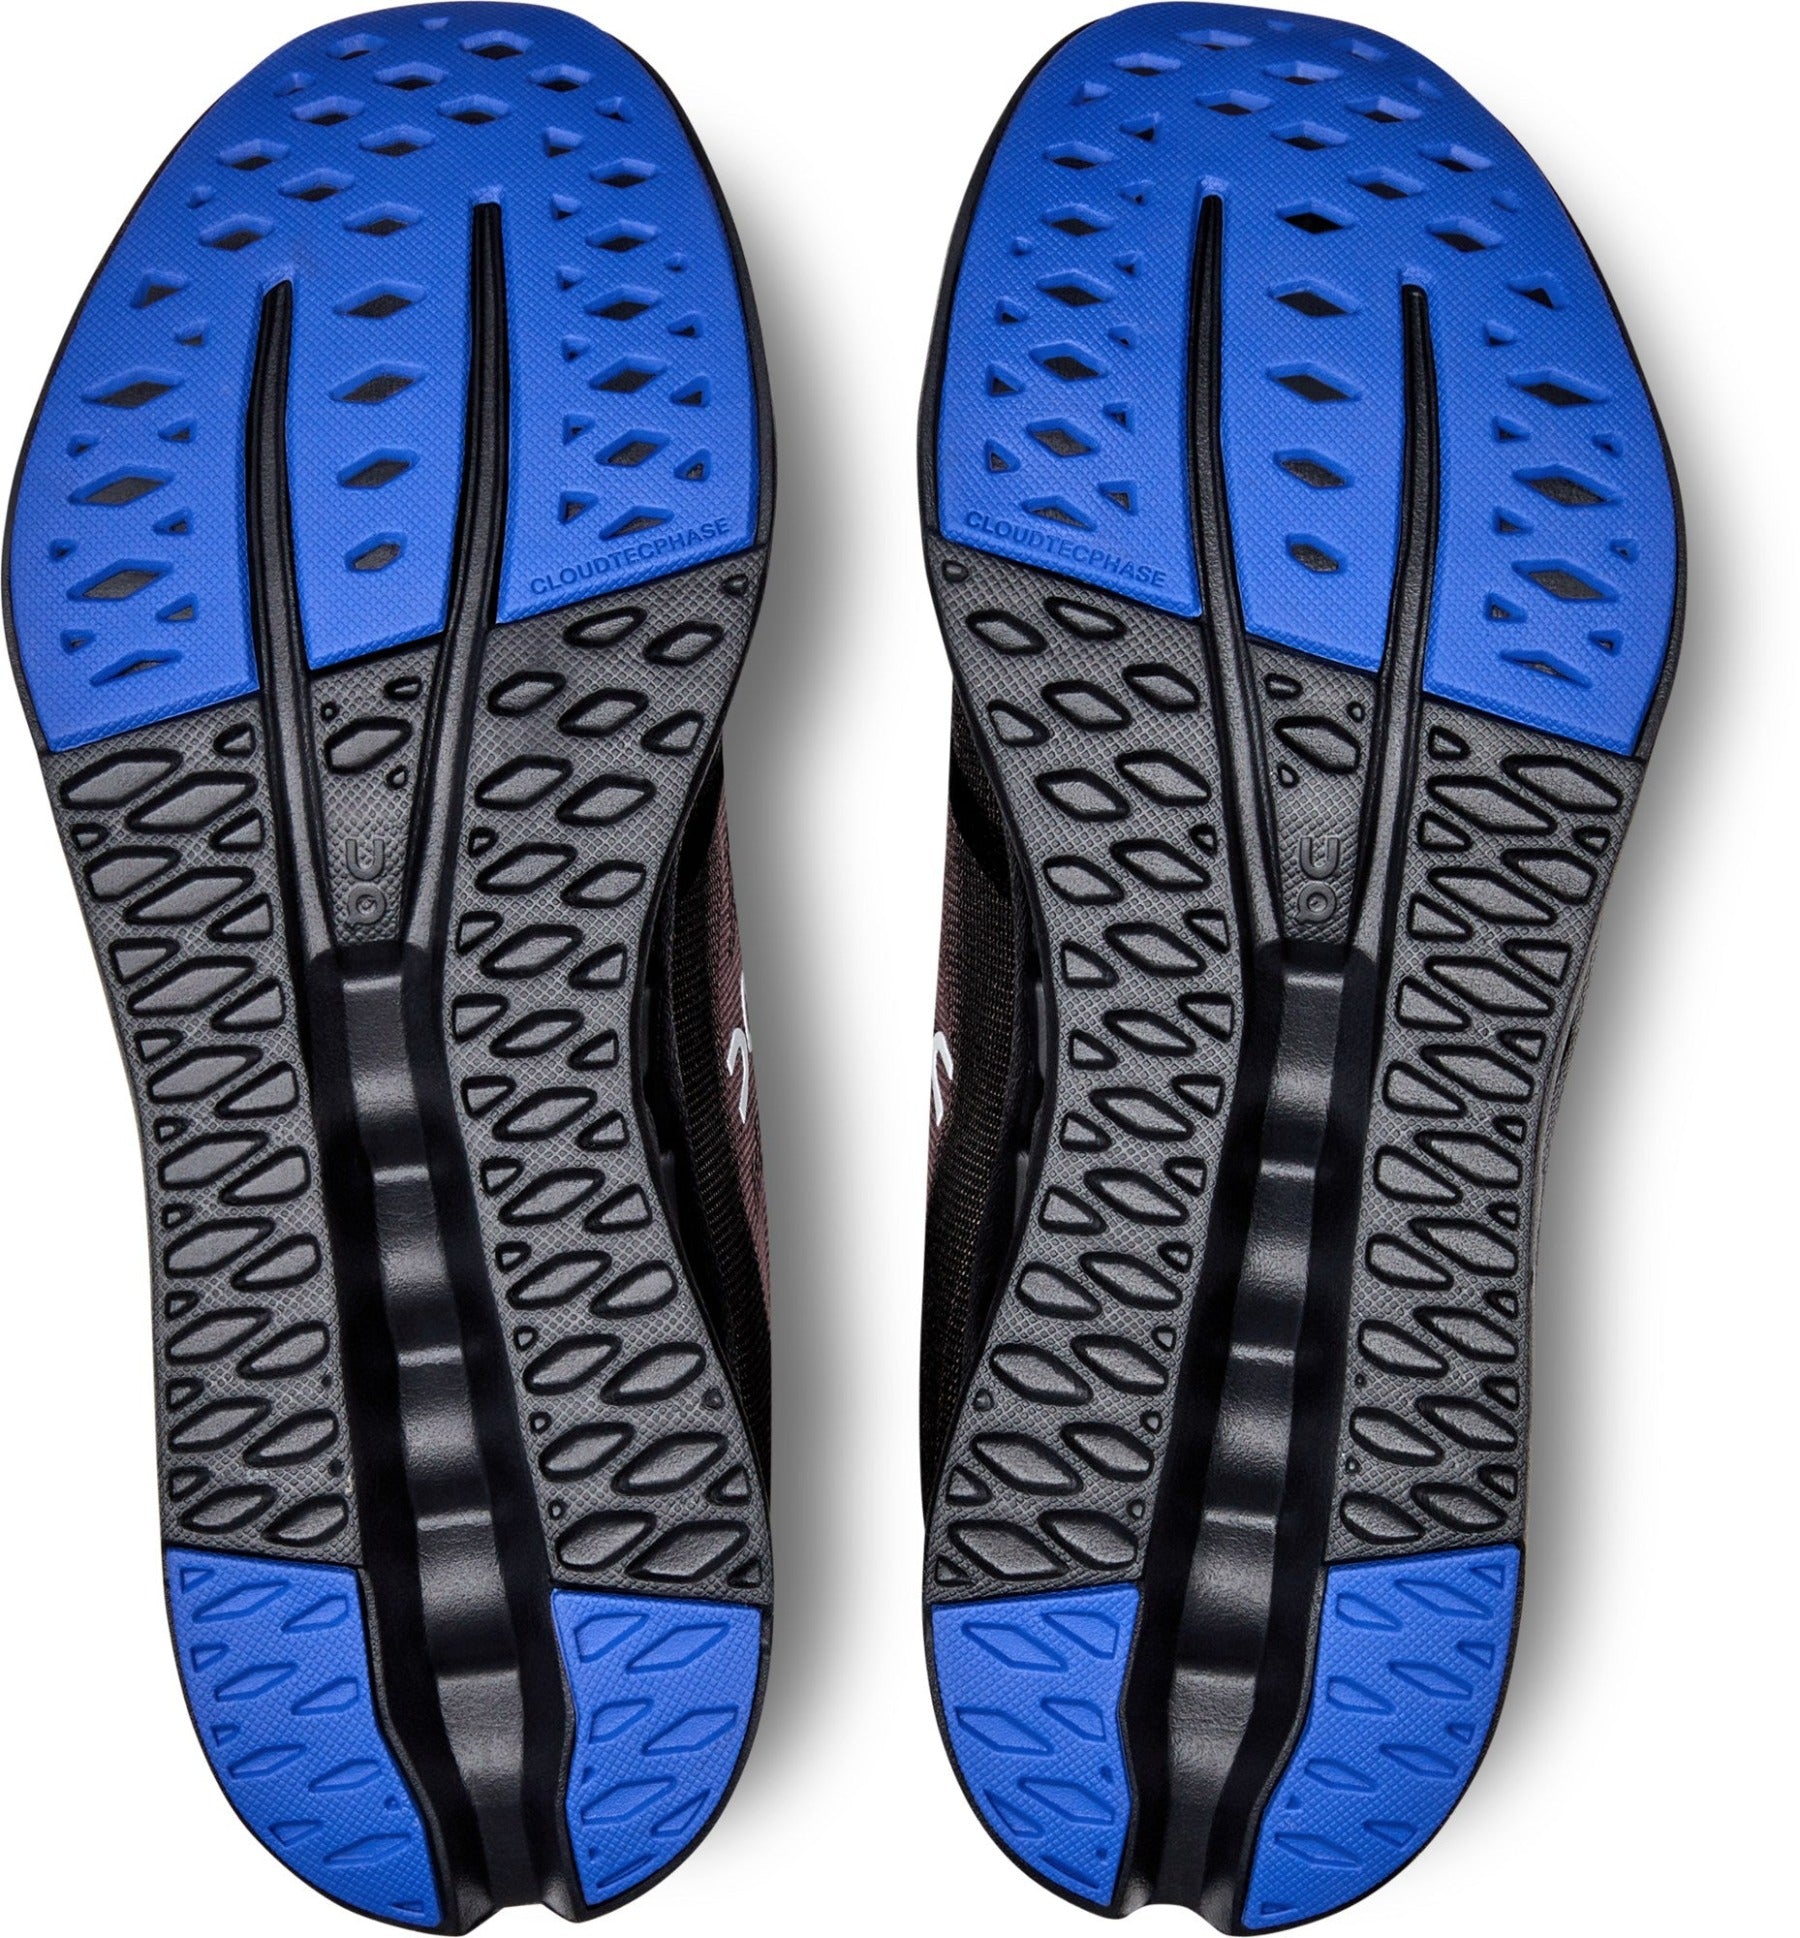 Bottom (outer sole) view of the Women's Cloudsurfer by ON in the color Black/Cobalt